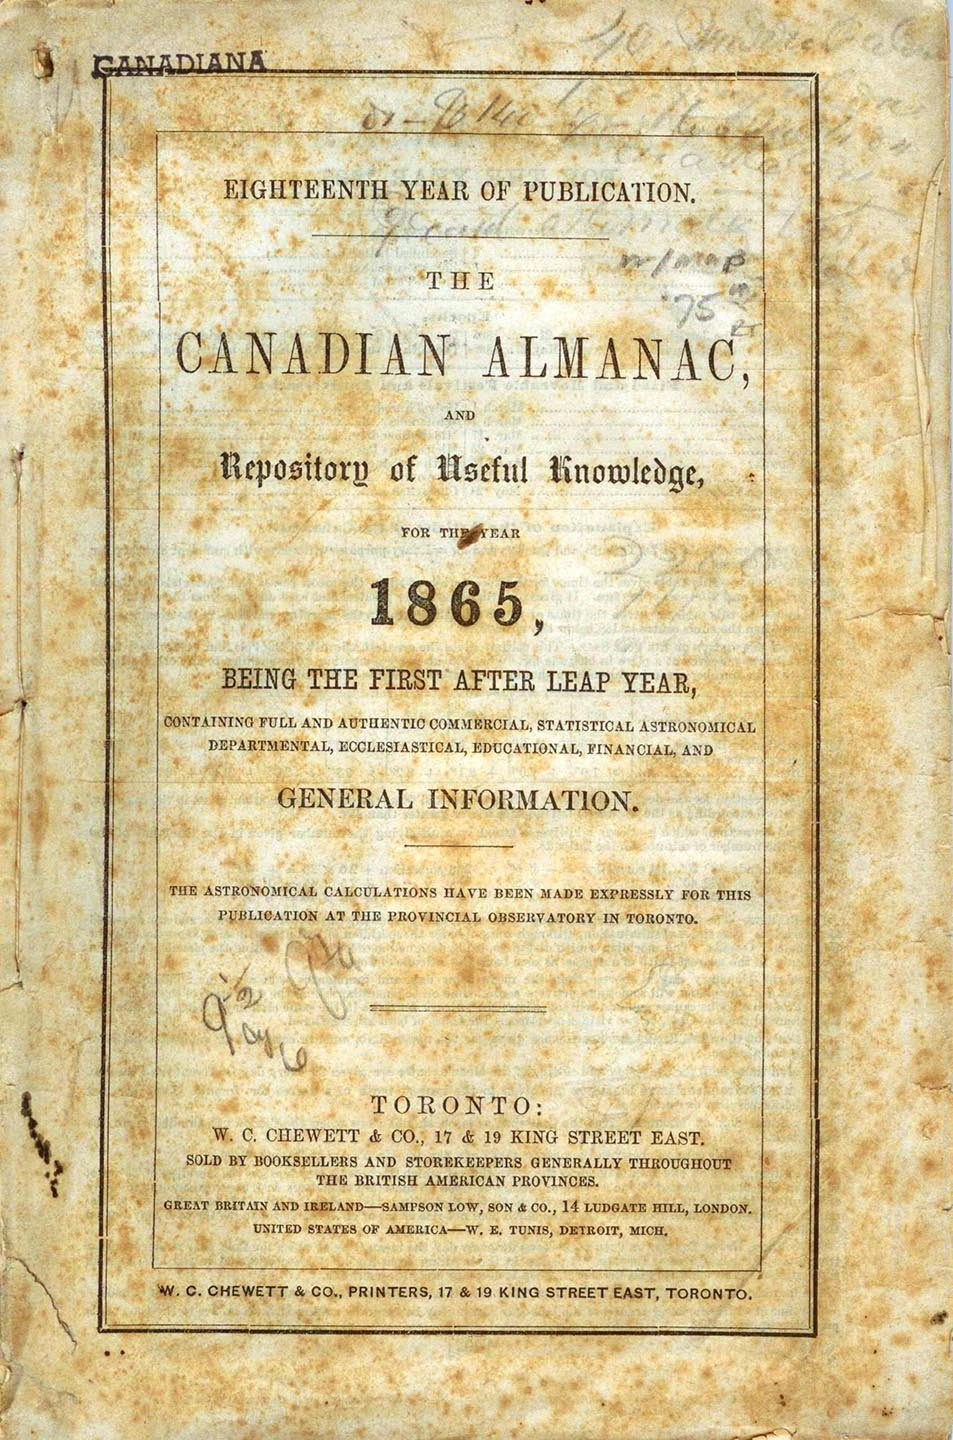 The Canadian Almanac, and Repository of Useful Knowledge for the Year 1865